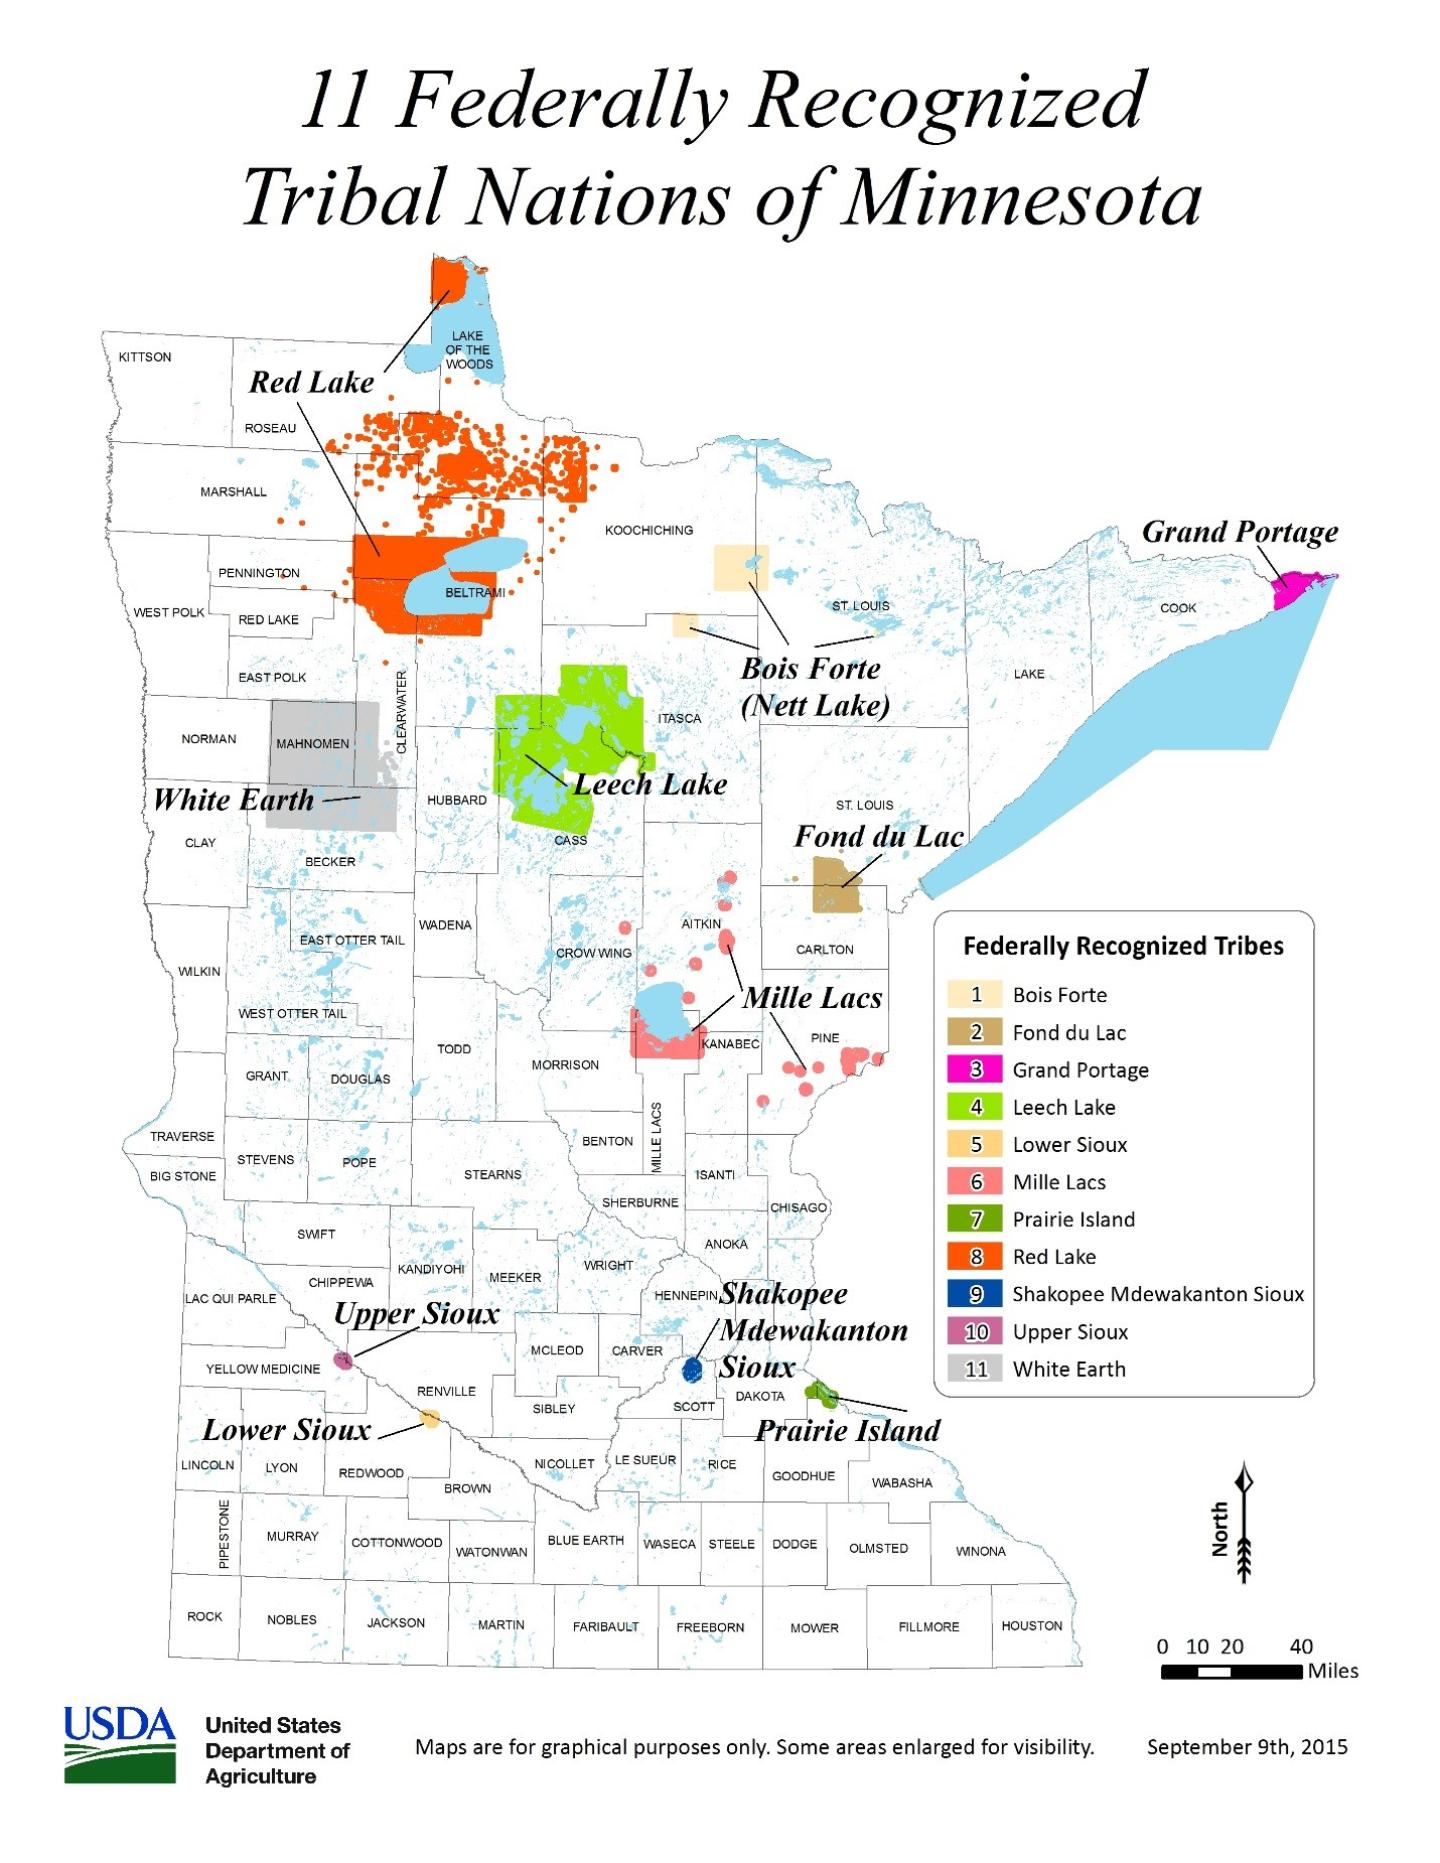 11 Federally Recognized Tribal Nations of Minnesota